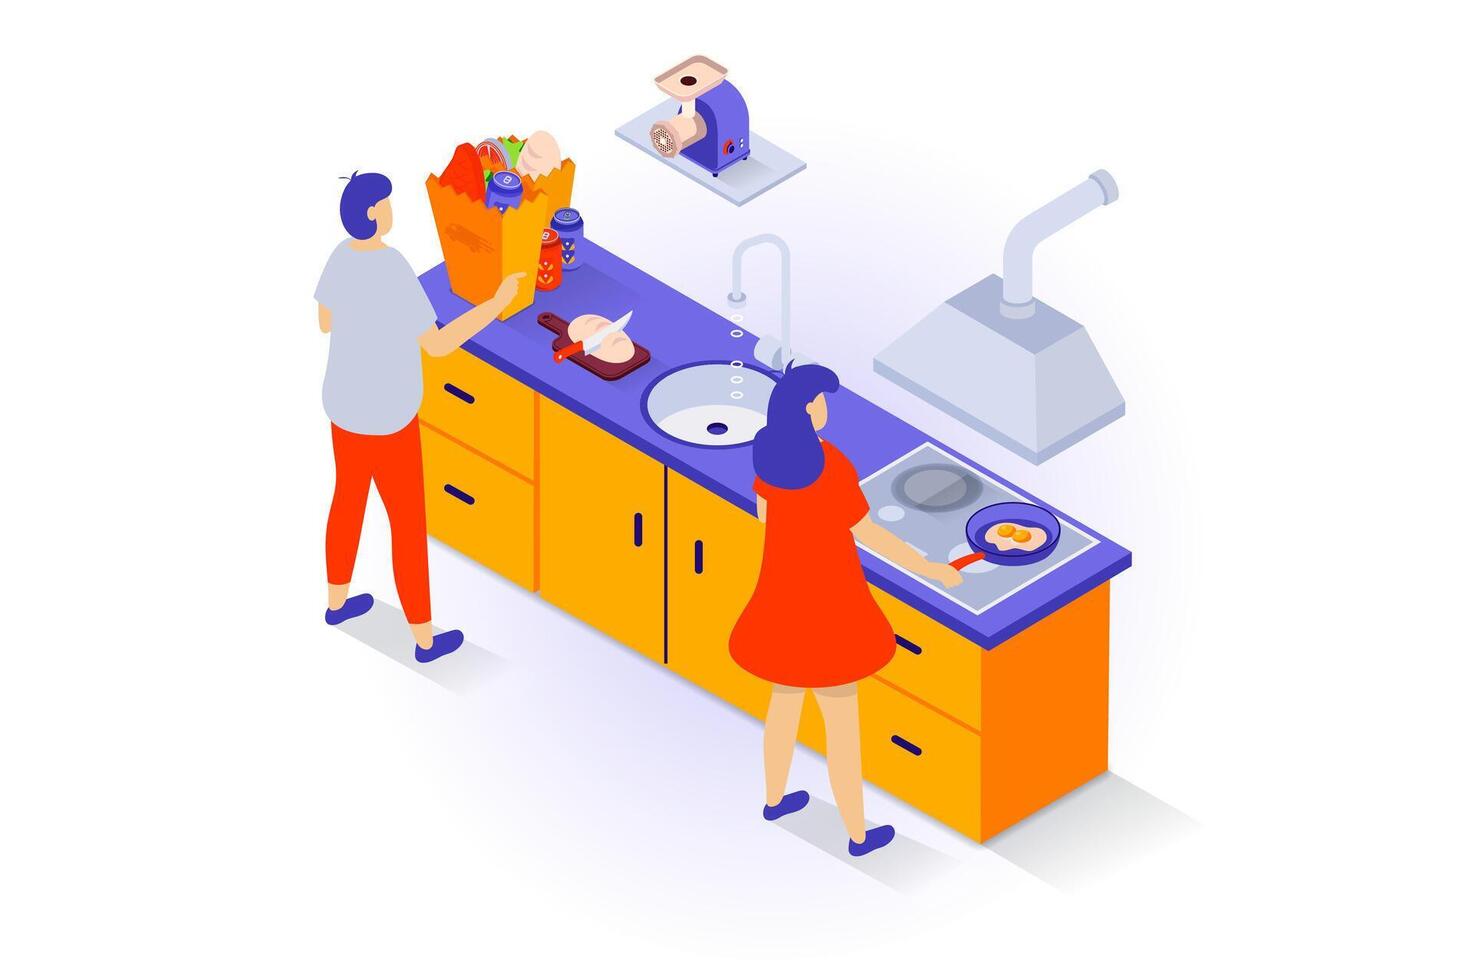 Home interior concept in 3d isometric design. People stand in kitchen room with tables, products bags on countertop, cooking at stove with hood. Vector illustration with isometry scene for web graphic